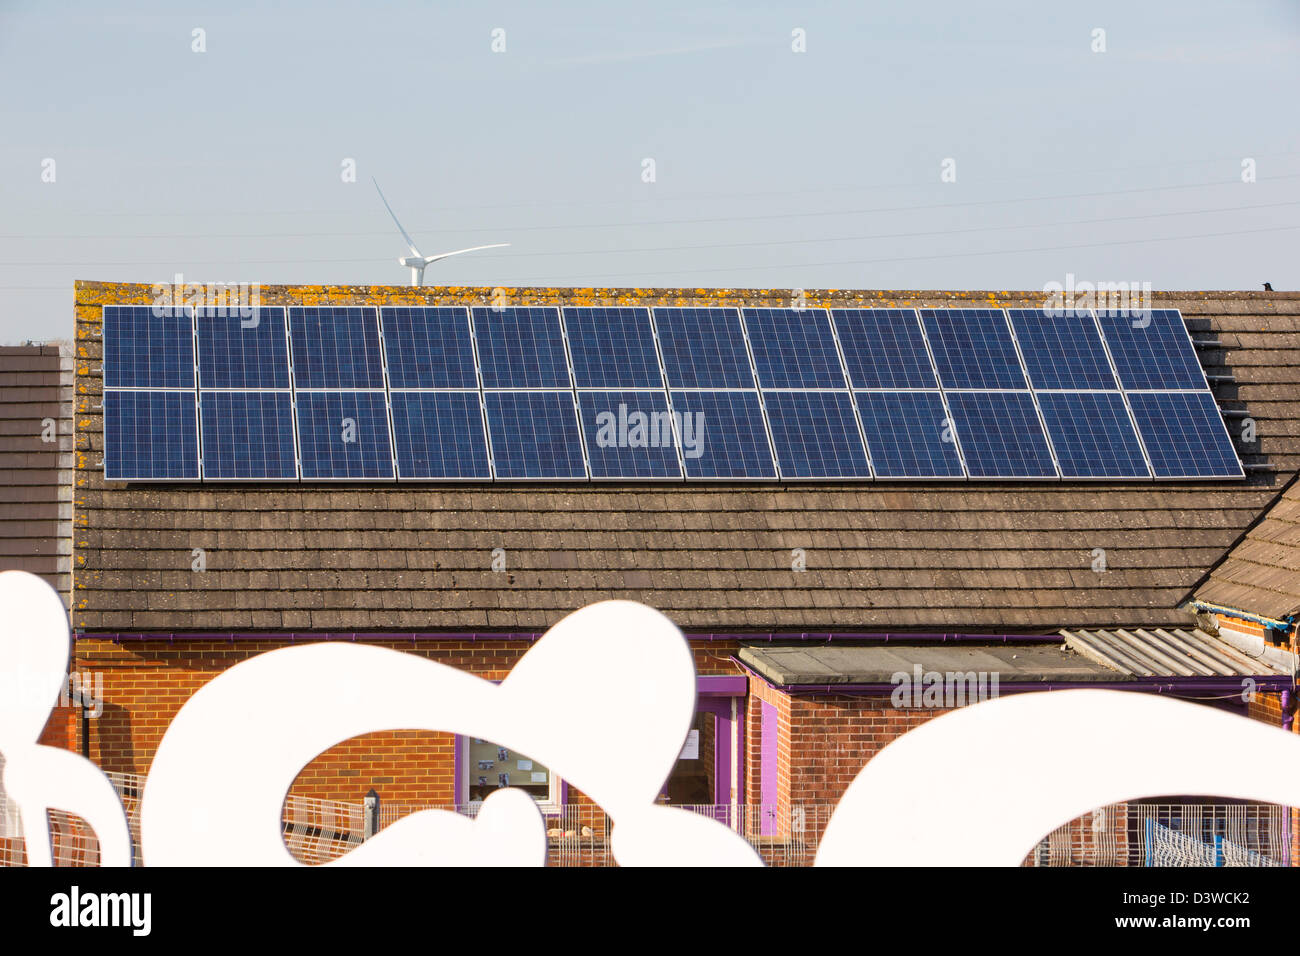 A nursery school in Seaton near Workington, Cumbria UK, with solar panels on the roof, and a Sustrans cycle route Stock Photo